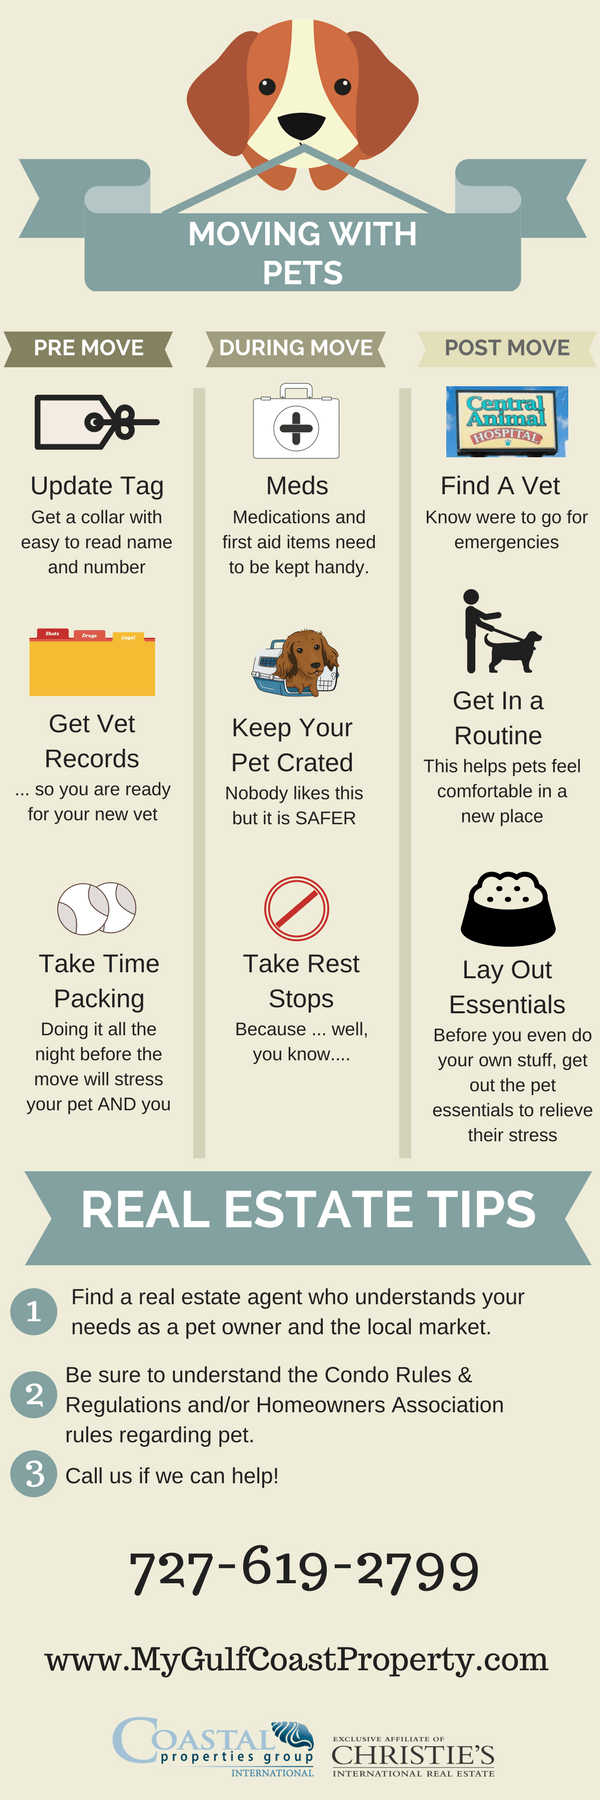 Tips for Moving With Pets